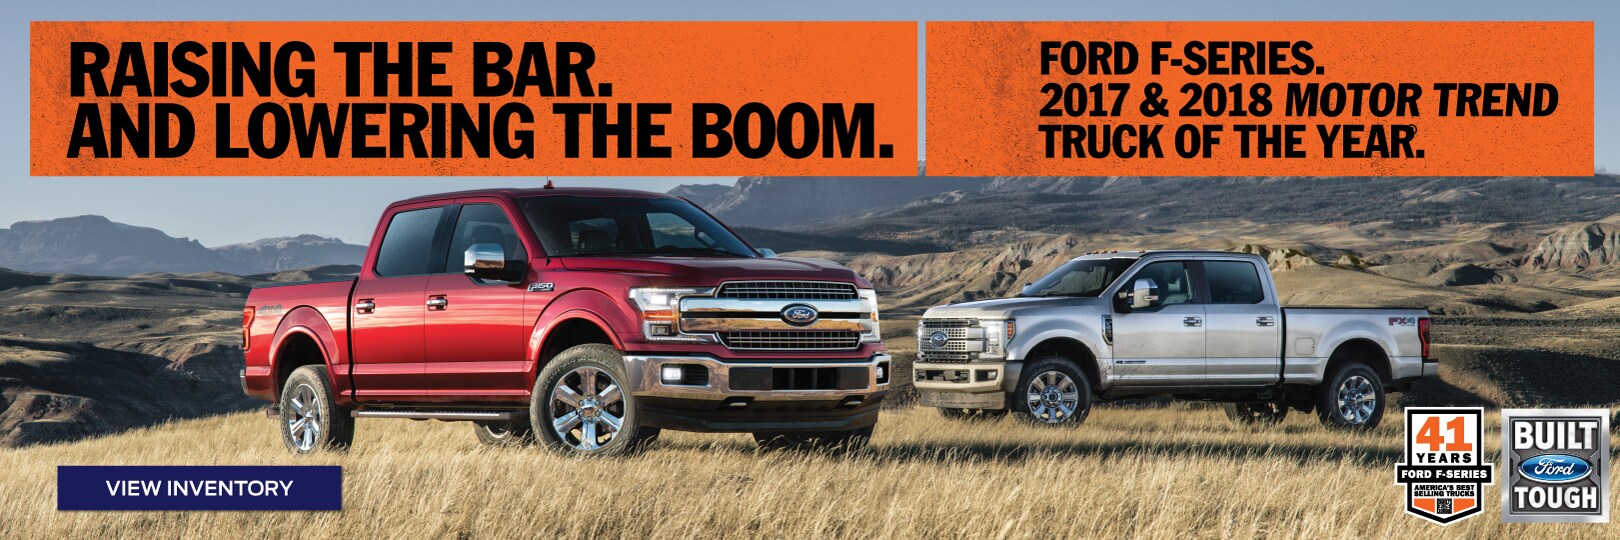 Antelope Valley Ford & Lincoln Dealership - Home of the Best Deals on ...